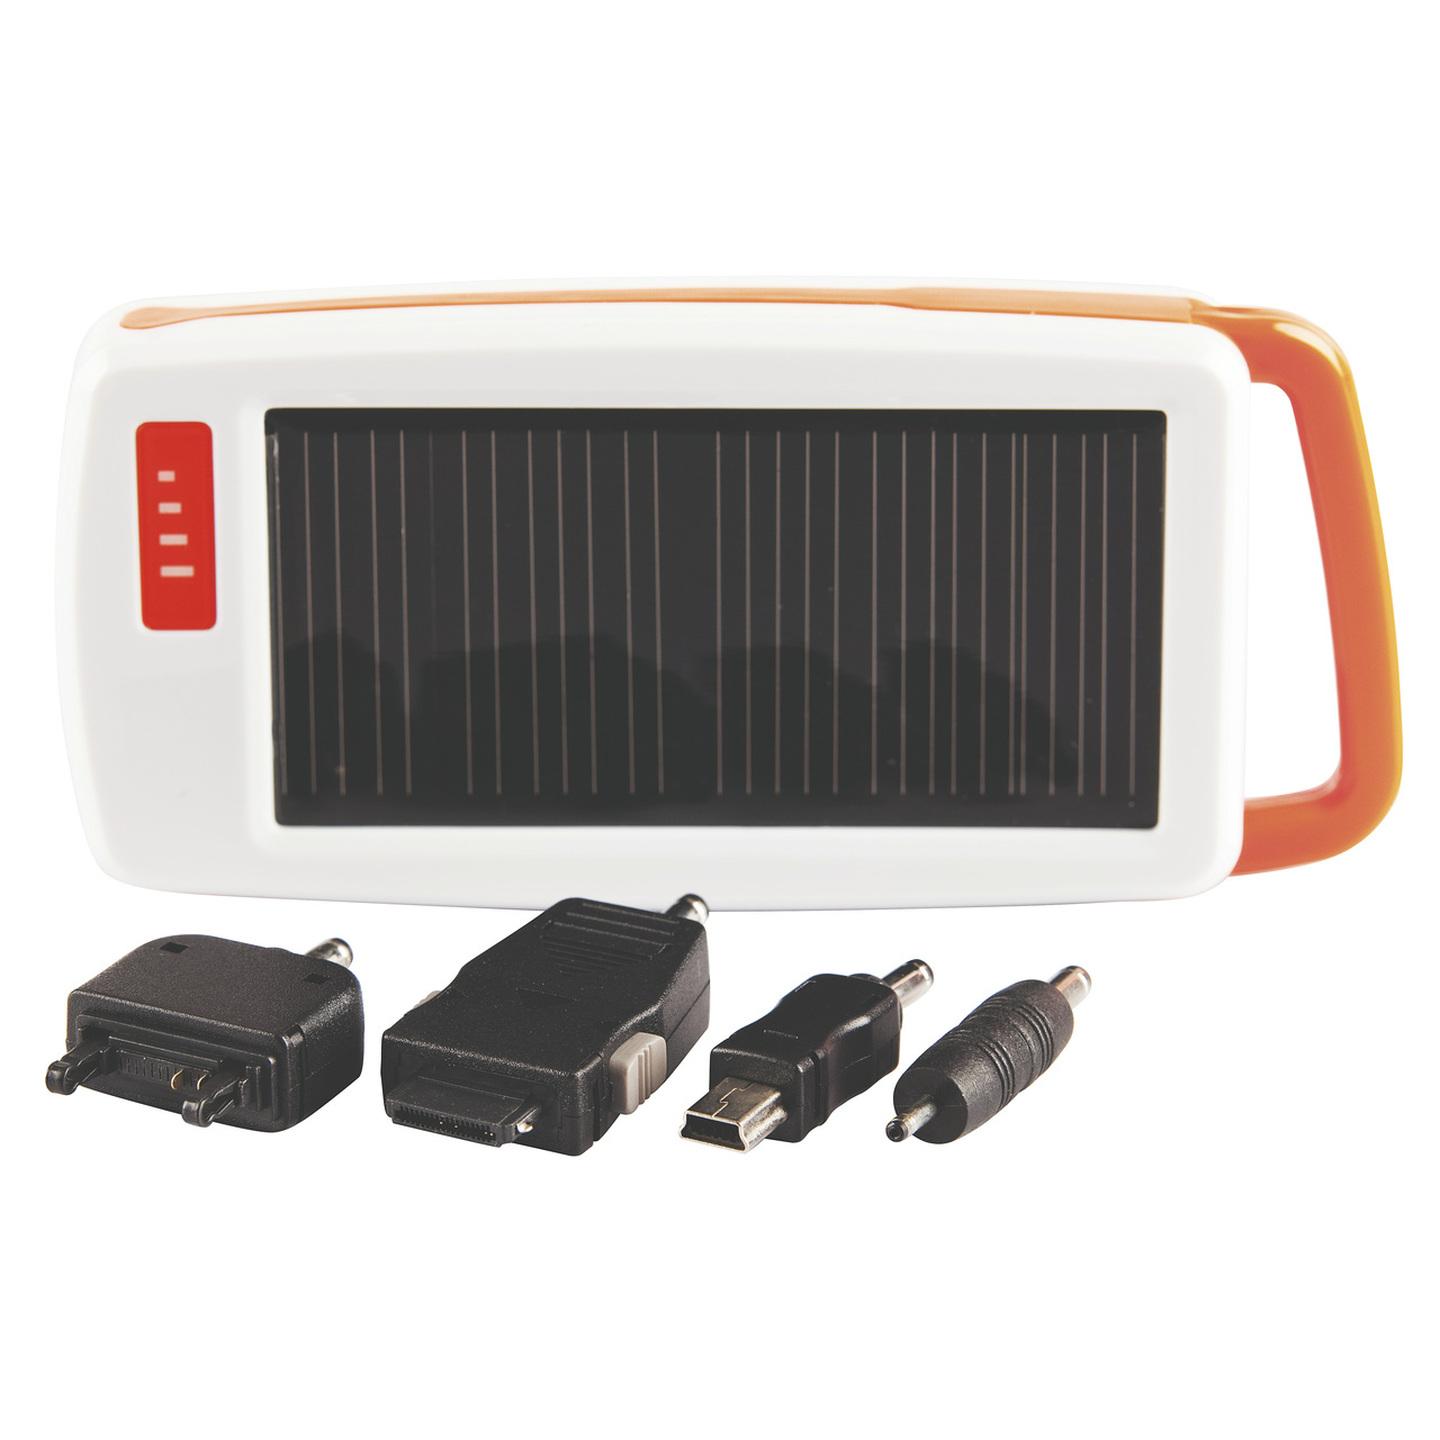 SOLAR MOBILE PHONE CHARGER WITH LED LIGHT PANEL